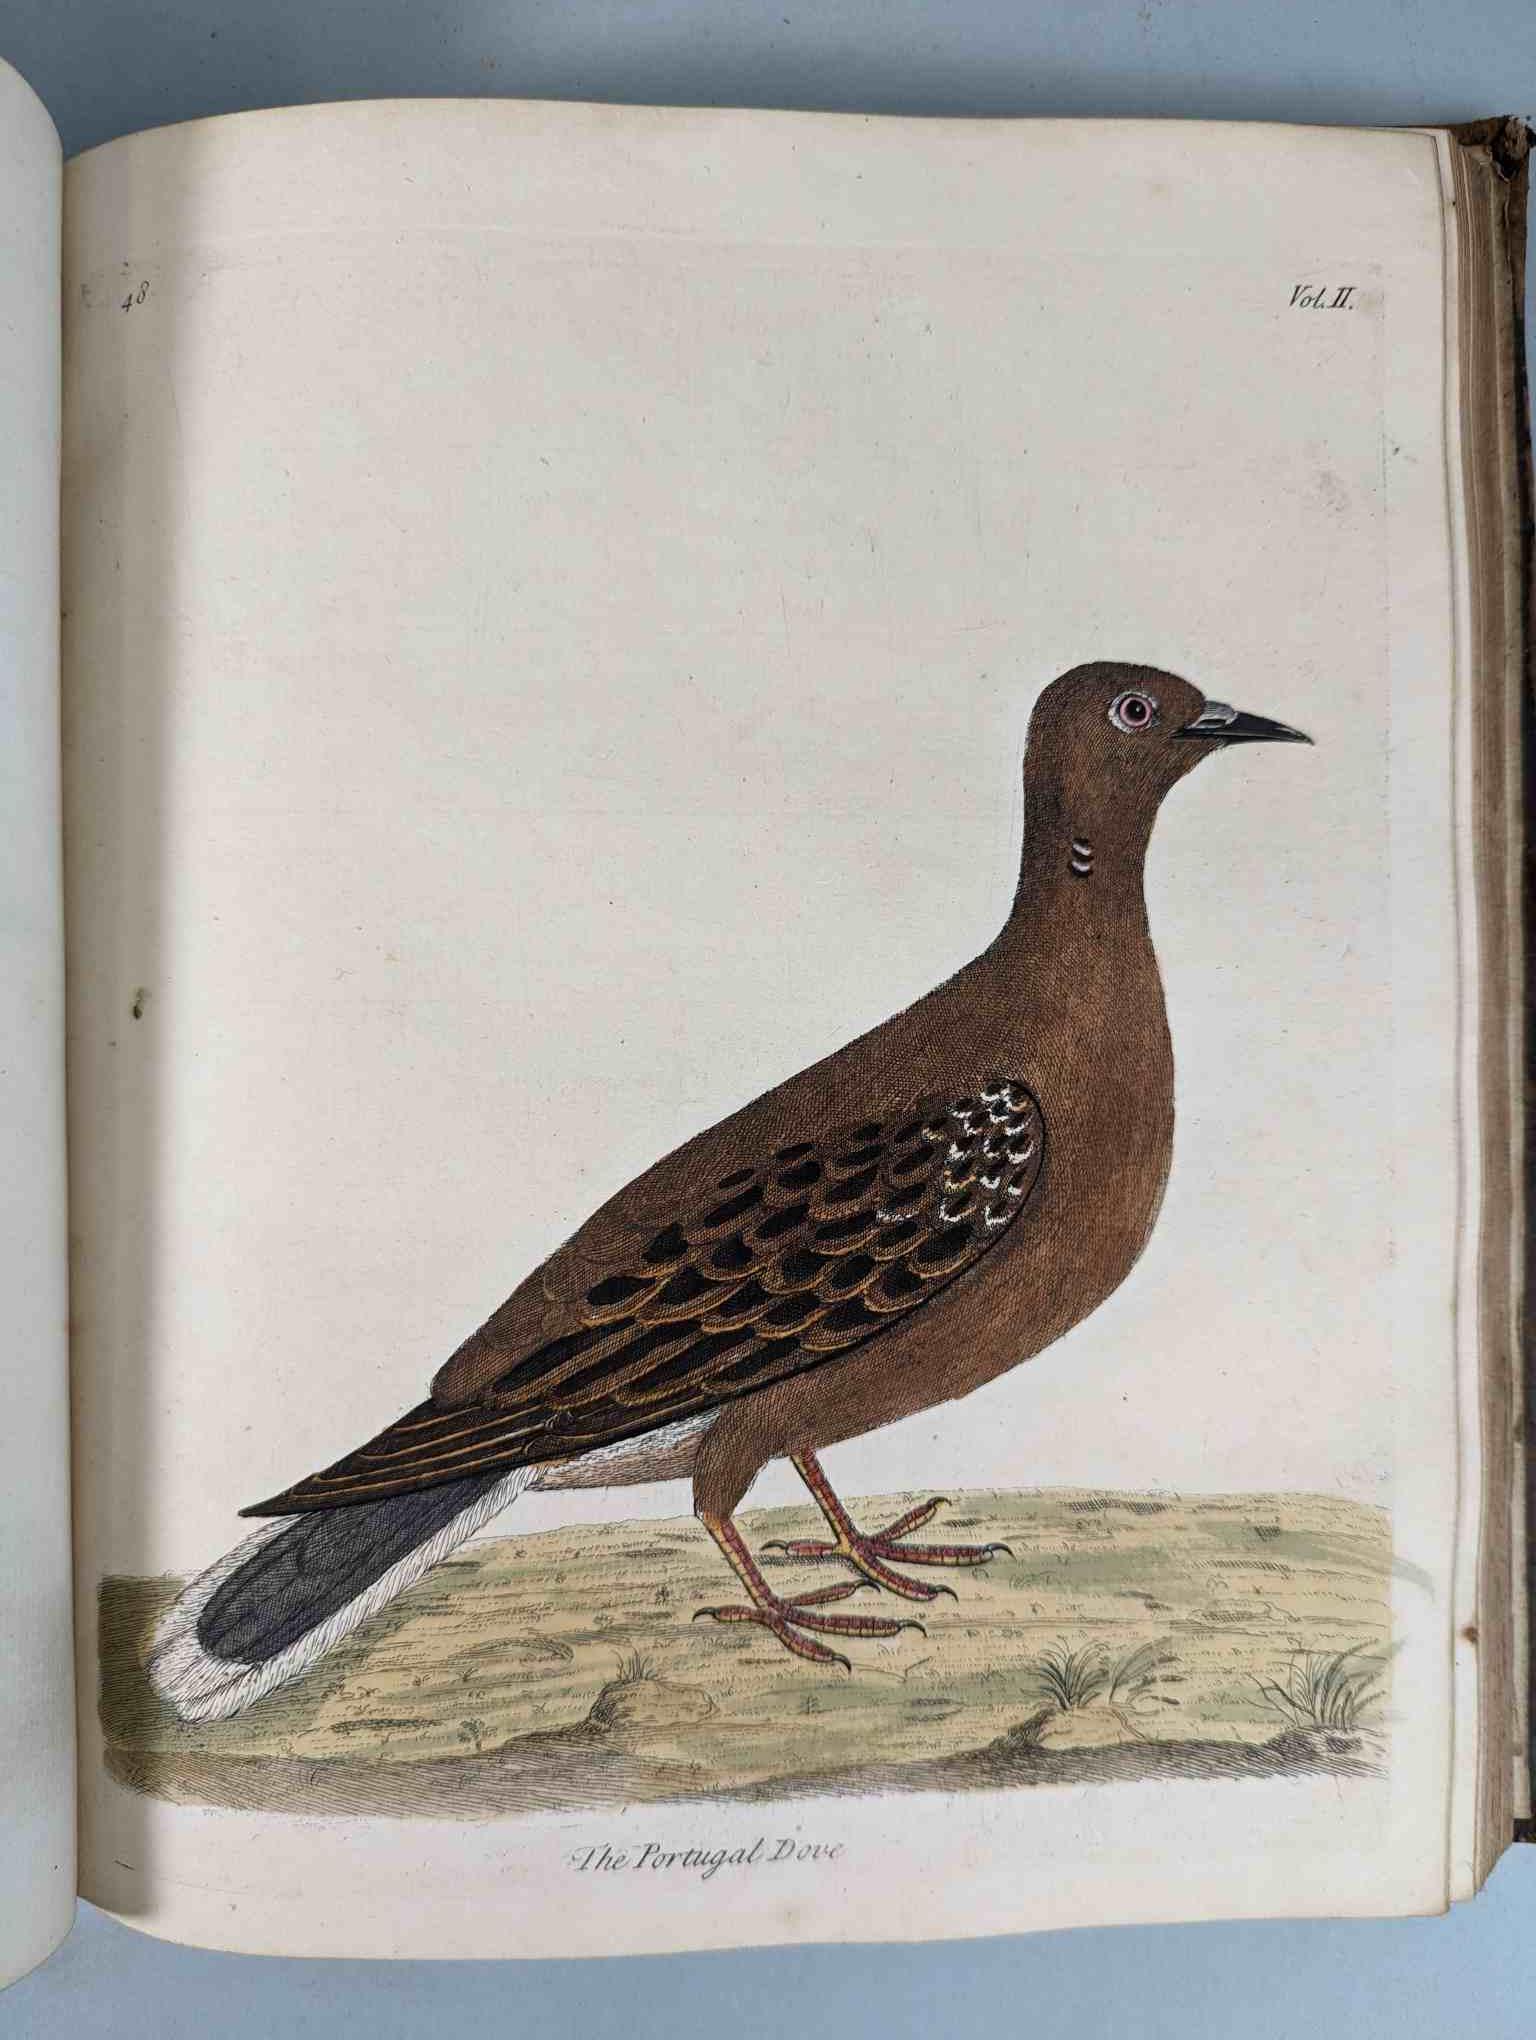 ALBIN, Eleazar. A Natural History of Birds, to which are added, Notes and Observations by W. - Image 152 of 208